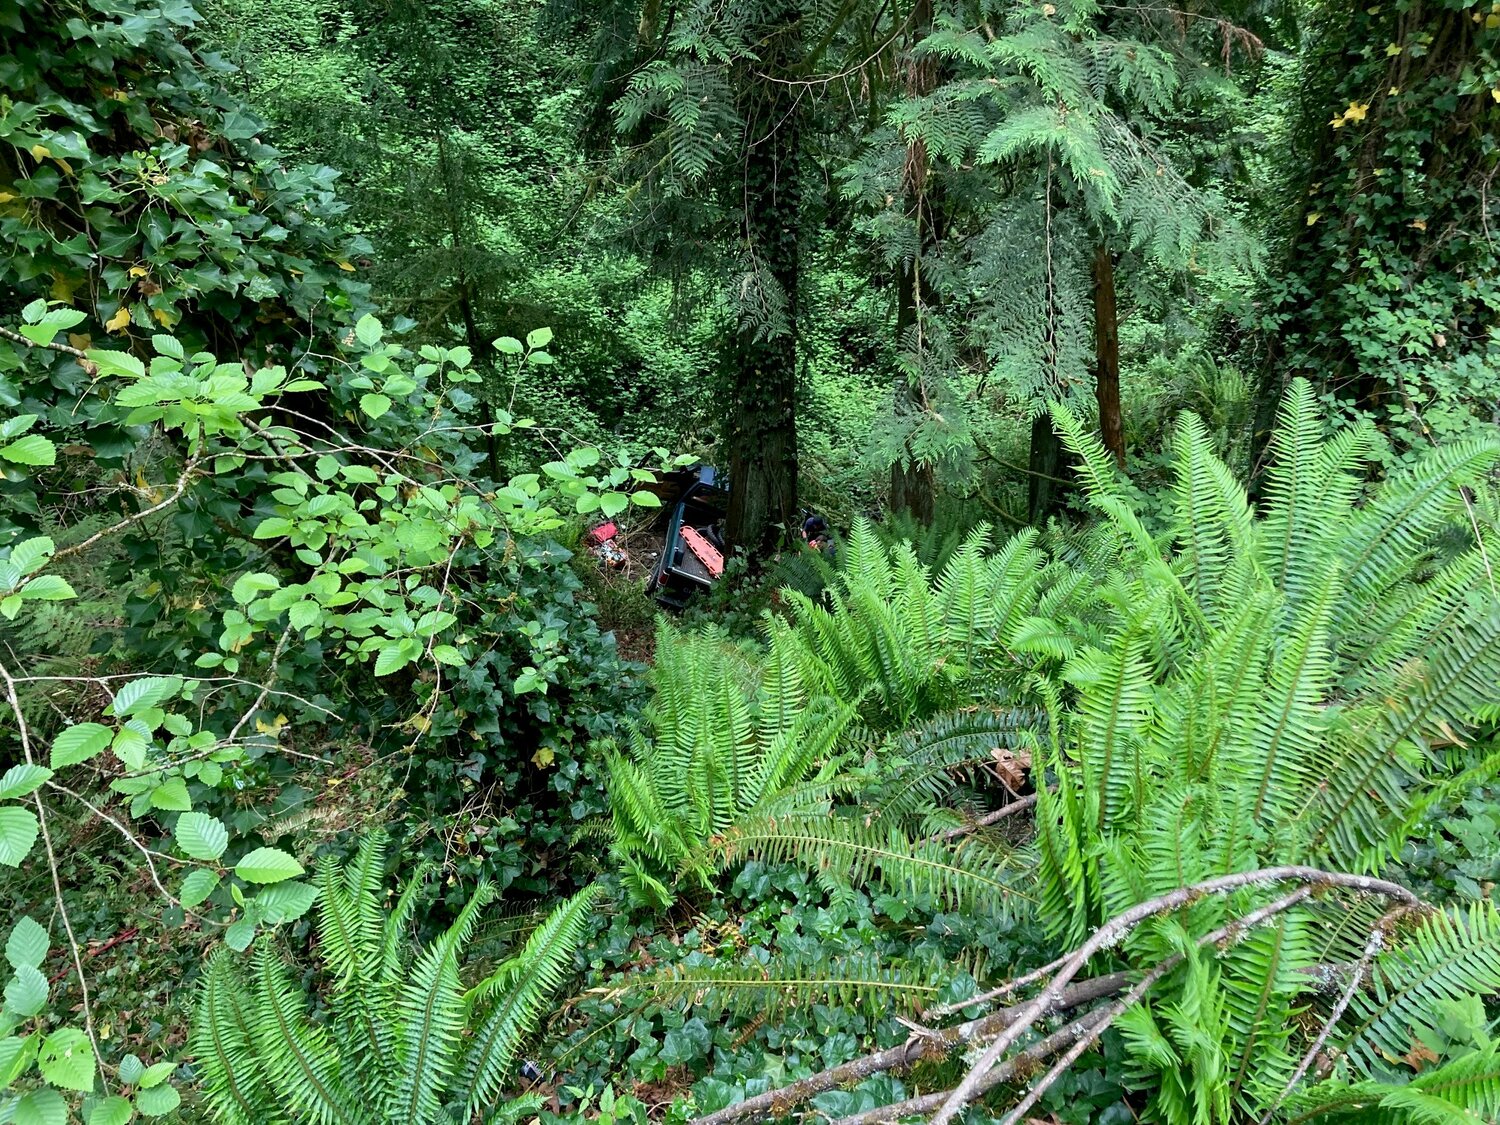 Cowlitz County rescuers saved a 56-year-old man after he was found in his pickup at the bottom of a ravine Sunday morning.